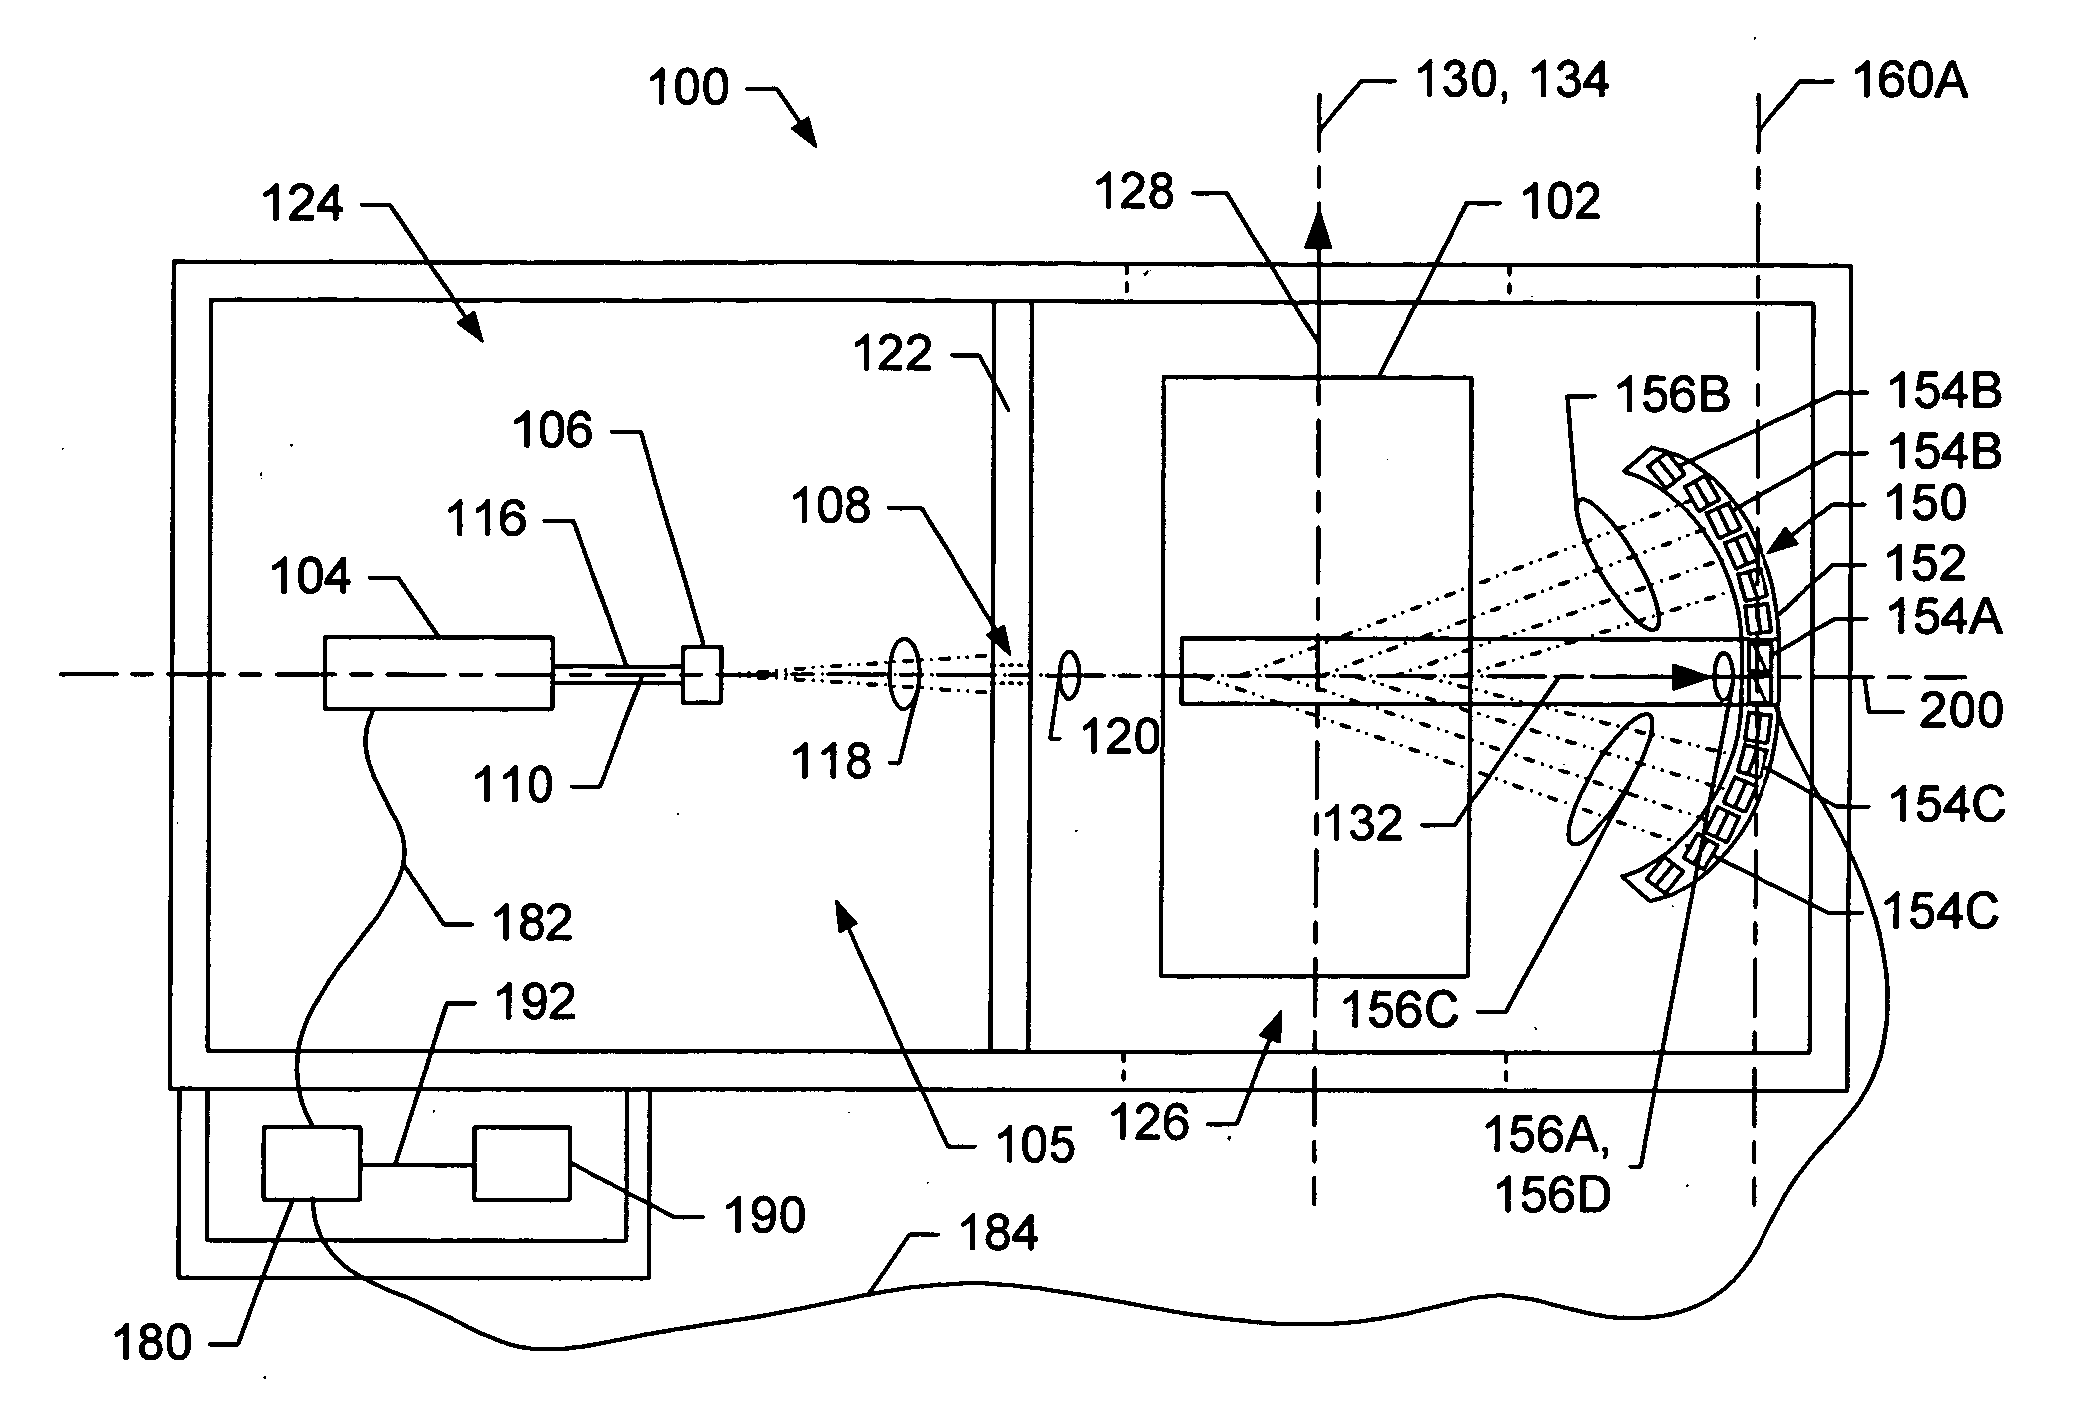 Non-intrusive container inspection system using forward-scattered radiation